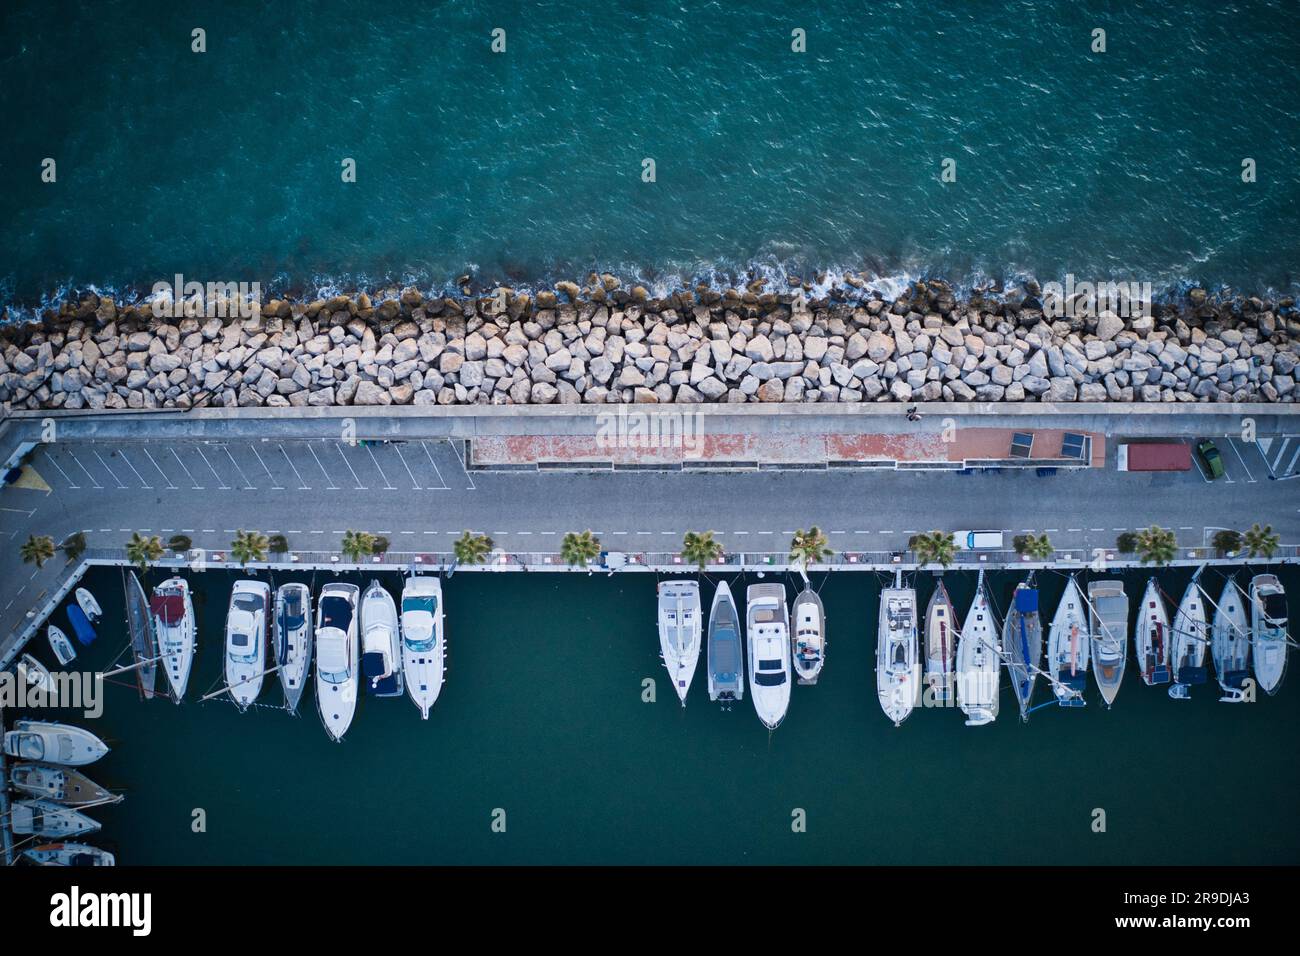 An aerial view of a calm body of water with boats lined up in a row near the shore Stock Photo